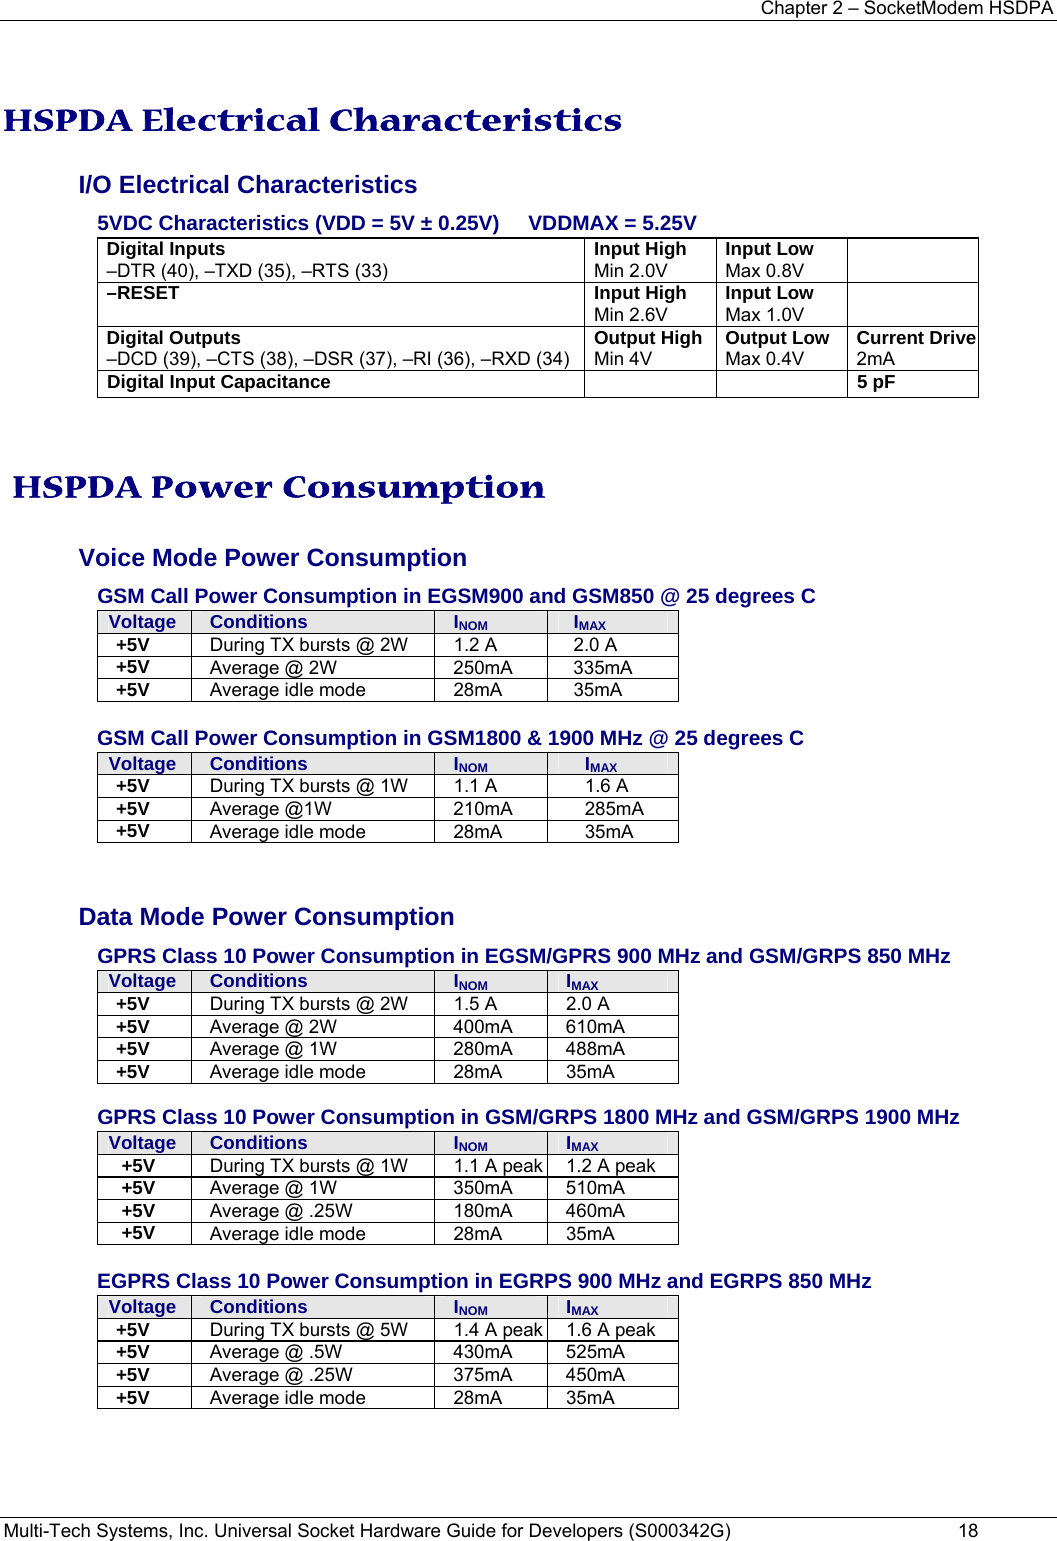 Chapter 2 – SocketModem HSDPA Multi-Tech Systems, Inc. Universal Socket Hardware Guide for Developers (S000342G)  18   HSPDA Electrical Characteristics I/O Electrical Characteristics 5VDC Characteristics (VDD = 5V ± 0.25V)     VDDMAX = 5.25V   Digital Inputs –DTR (40), –TXD (35), –RTS (33)  Input High Min 2.0V Input Low Max 0.8V  –RESET   Input High Min 2.6V Input Low Max 1.0V  Digital Outputs –DCD (39), –CTS (38), –DSR (37), –RI (36), –RXD (34) Output High Min 4V Output Low Max 0.4V Current Drive 2mA Digital Input Capacitance    5 pF     HSPDA Power Consumption Voice Mode Power Consumption  GSM Call Power Consumption in EGSM900 and GSM850 @ 25 degrees C Voltage  Conditions  INOM  IMAX +5V  During TX bursts @ 2W  1.2 A  2.0 A +5V  Average @ 2W  250mA  335mA +5V  Average idle mode  28mA  35mA  GSM Call Power Consumption in GSM1800 &amp; 1900 MHz @ 25 degrees C Voltage  Conditions  INOM  IMAX +5V  During TX bursts @ 1W  1.1 A   1.6 A +5V  Average @1W  210mA  285mA +5V  Average idle mode  28mA  35mA  Data Mode Power Consumption  GPRS Class 10 Power Consumption in EGSM/GPRS 900 MHz and GSM/GRPS 850 MHz    Voltage Conditions  INOM  IMAX +5V  During TX bursts @ 2W  1.5 A   2.0 A  +5V  Average @ 2W  400mA  610mA +5V  Average @ 1W  280mA  488mA +5V  Average idle mode  28mA  35mA  GPRS Class 10 Power Consumption in GSM/GRPS 1800 MHz and GSM/GRPS 1900 MHz Voltage Conditions  INOM  IMAX +5V  During TX bursts @ 1W  1.1 A peak 1.2 A peak +5V  Average @ 1W  350mA  510mA +5V  Average @ .25W  180mA  460mA +5V  Average idle mode  28mA  35mA  EGPRS Class 10 Power Consumption in EGRPS 900 MHz and EGRPS 850 MHz Voltage Conditions  INOM  IMAX +5V  During TX bursts @ 5W  1.4 A peak 1.6 A peak +5V  Average @ .5W  430mA  525mA +5V  Average @ .25W  375mA  450mA +5V  Average idle mode  28mA  35mA  